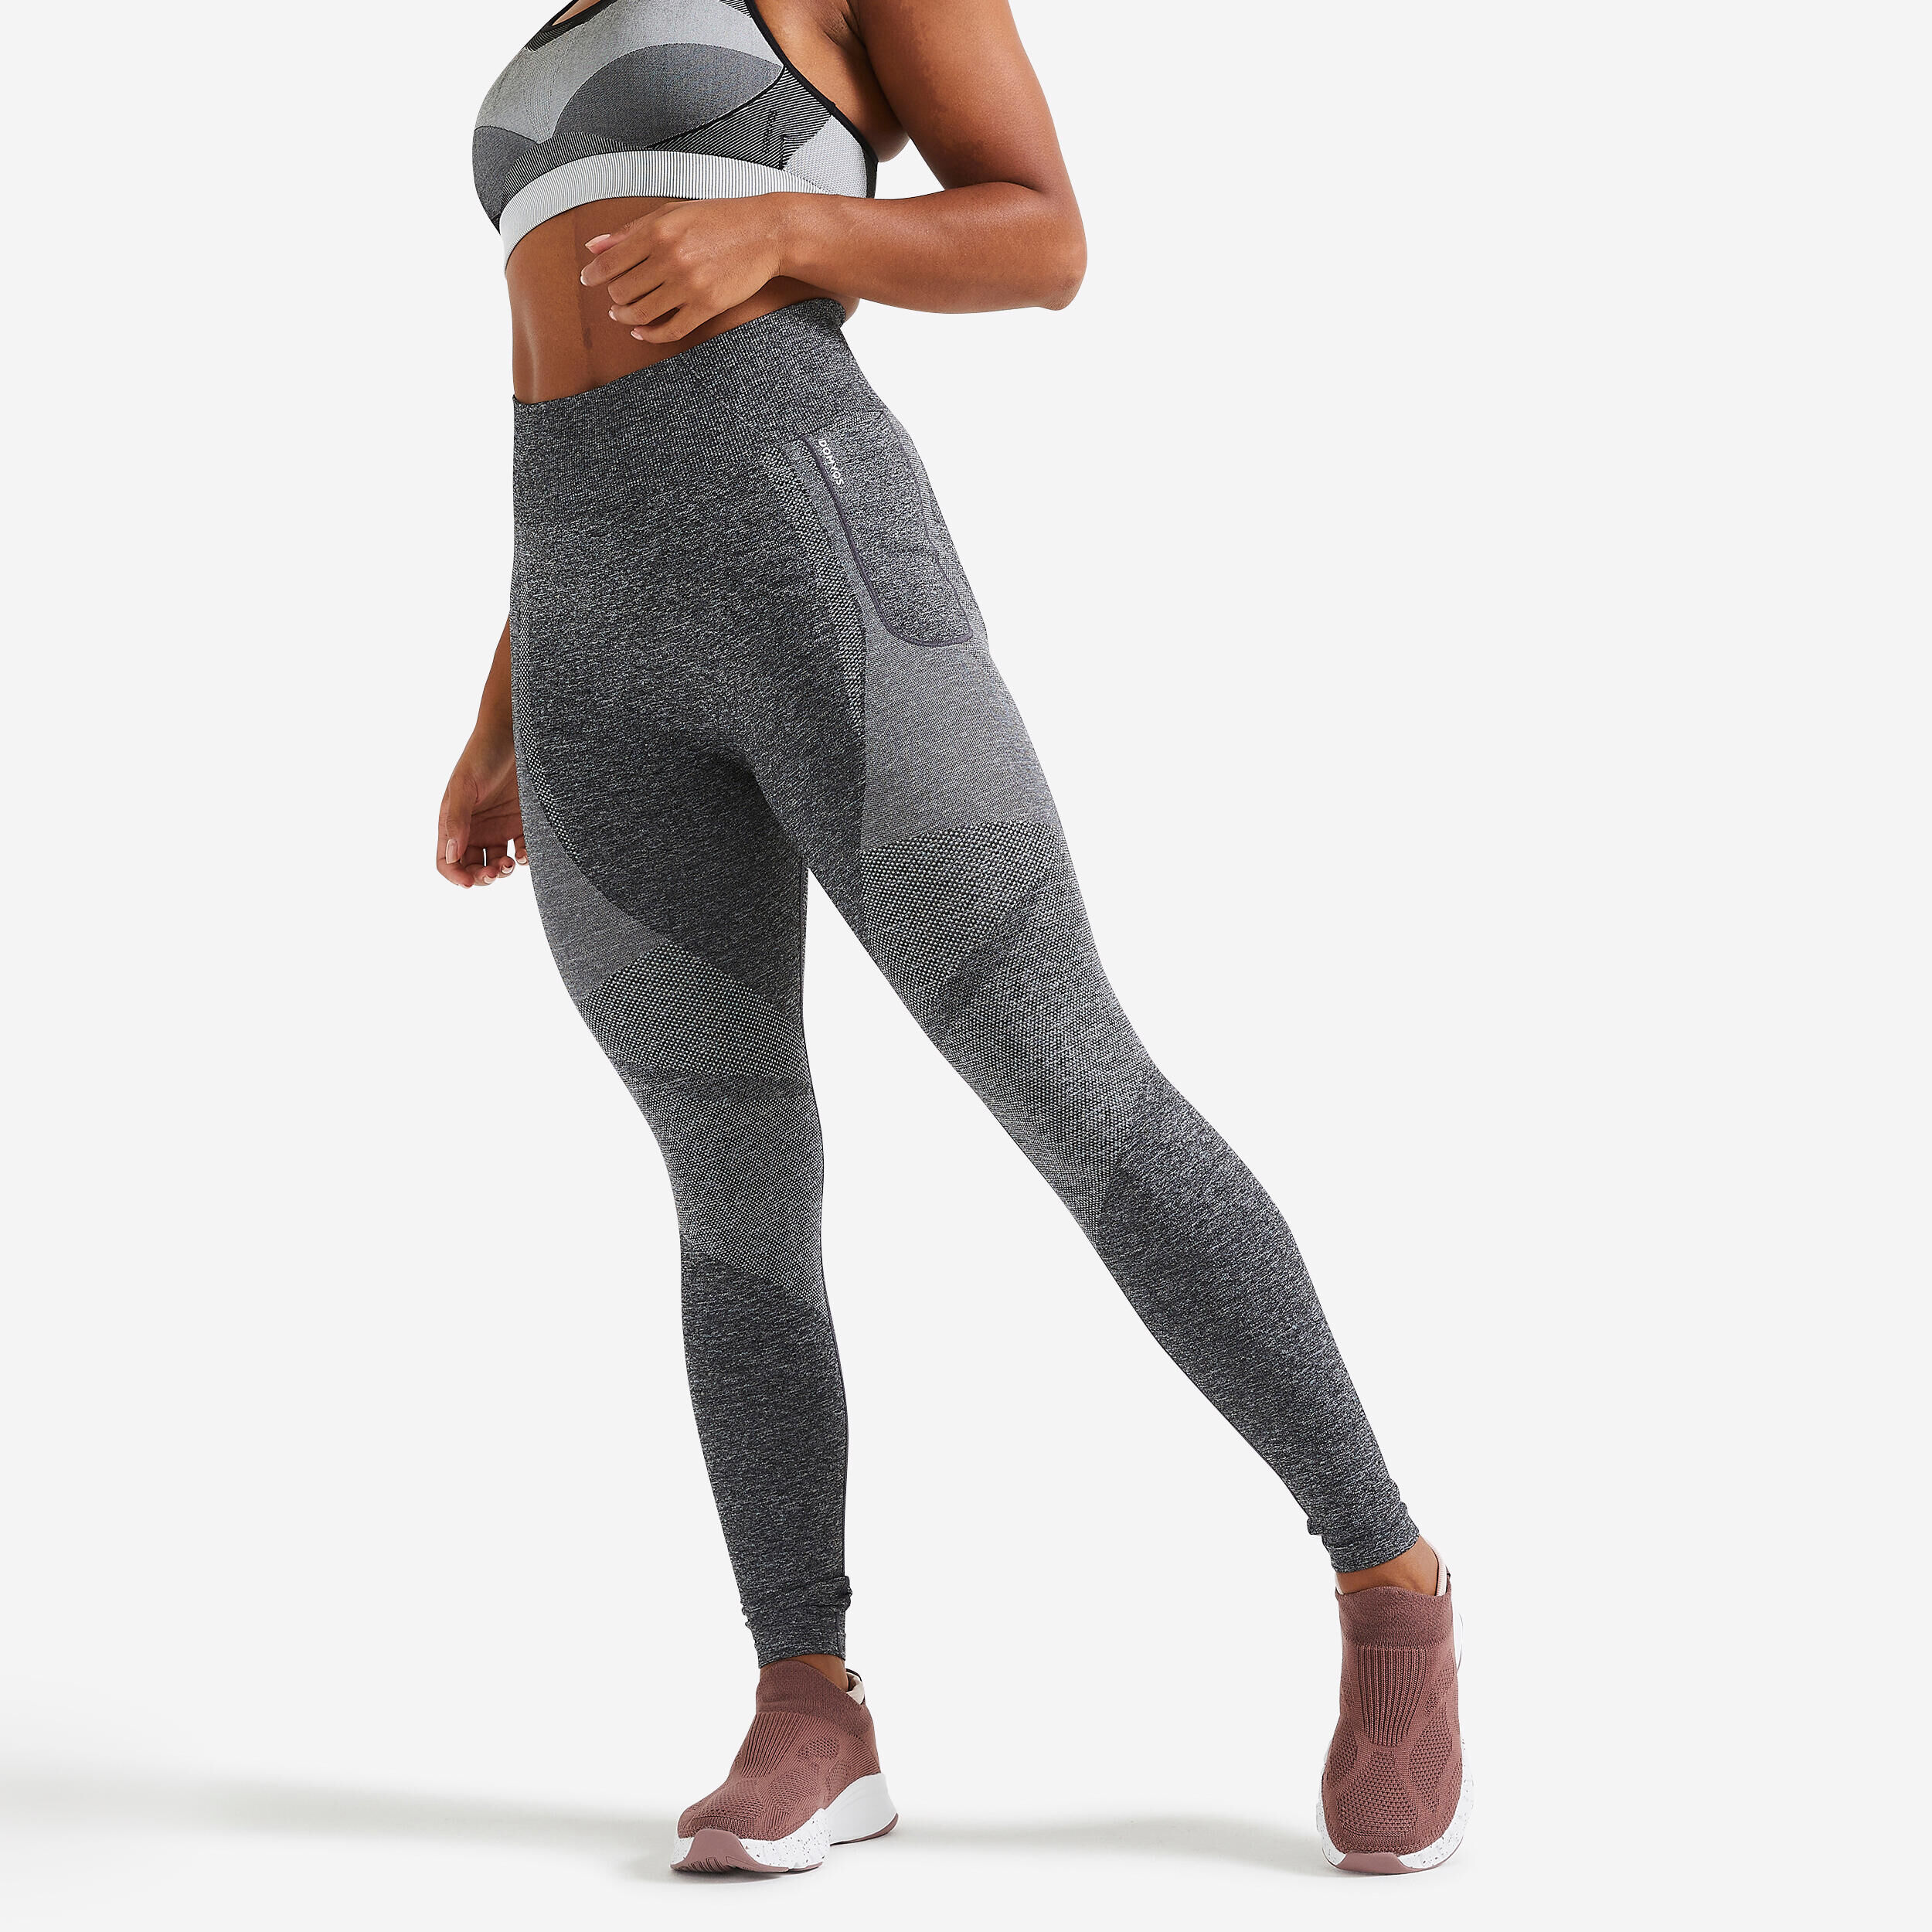 DOMYOS High-Waisted Seamless Fitness Leggings with Phone Pocket - Grey